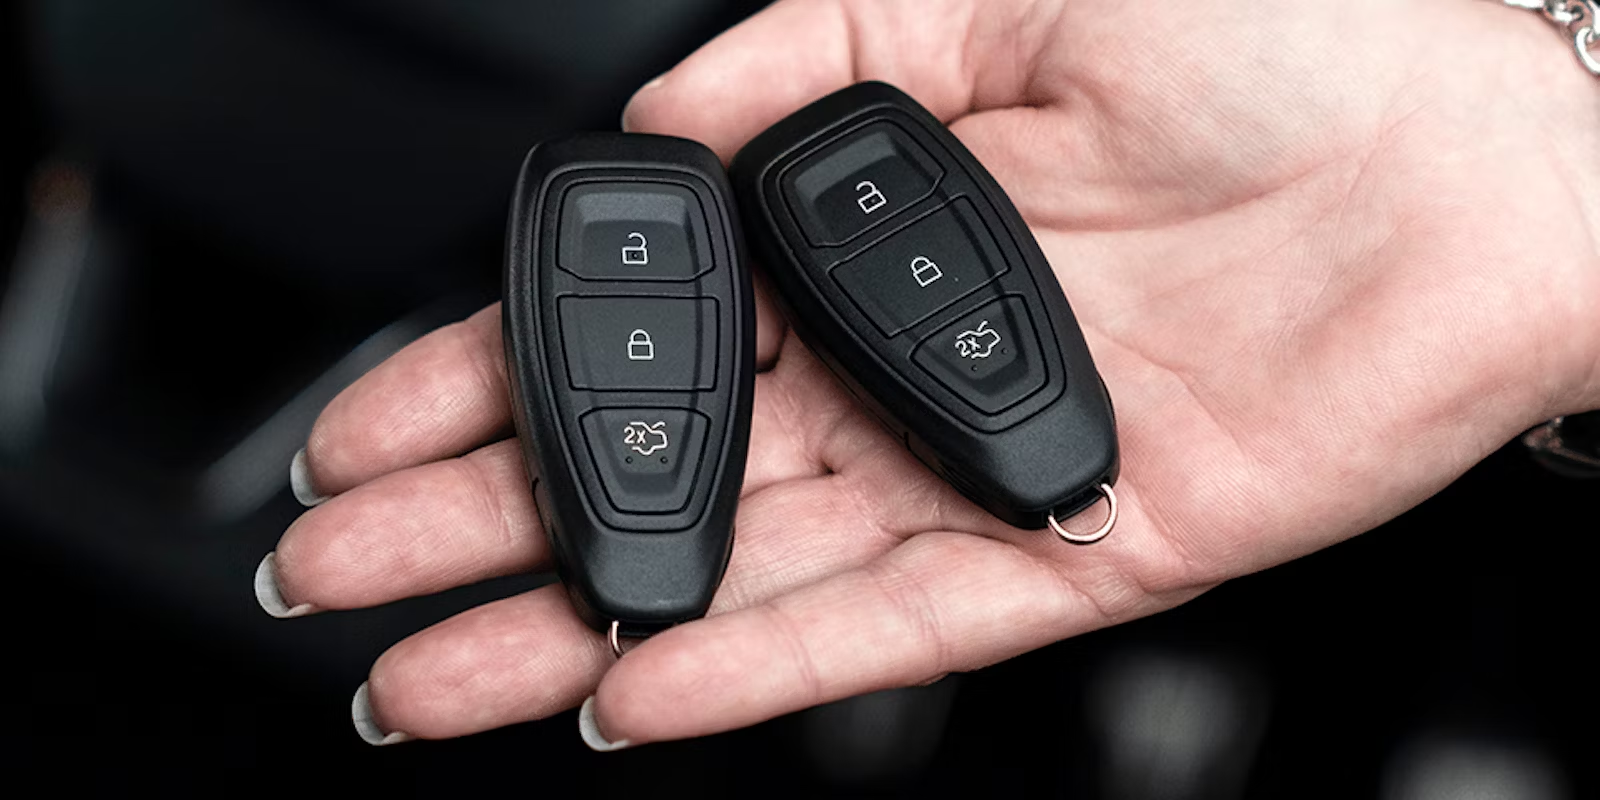 How do I troubleshoot a Ford car key that is not working?